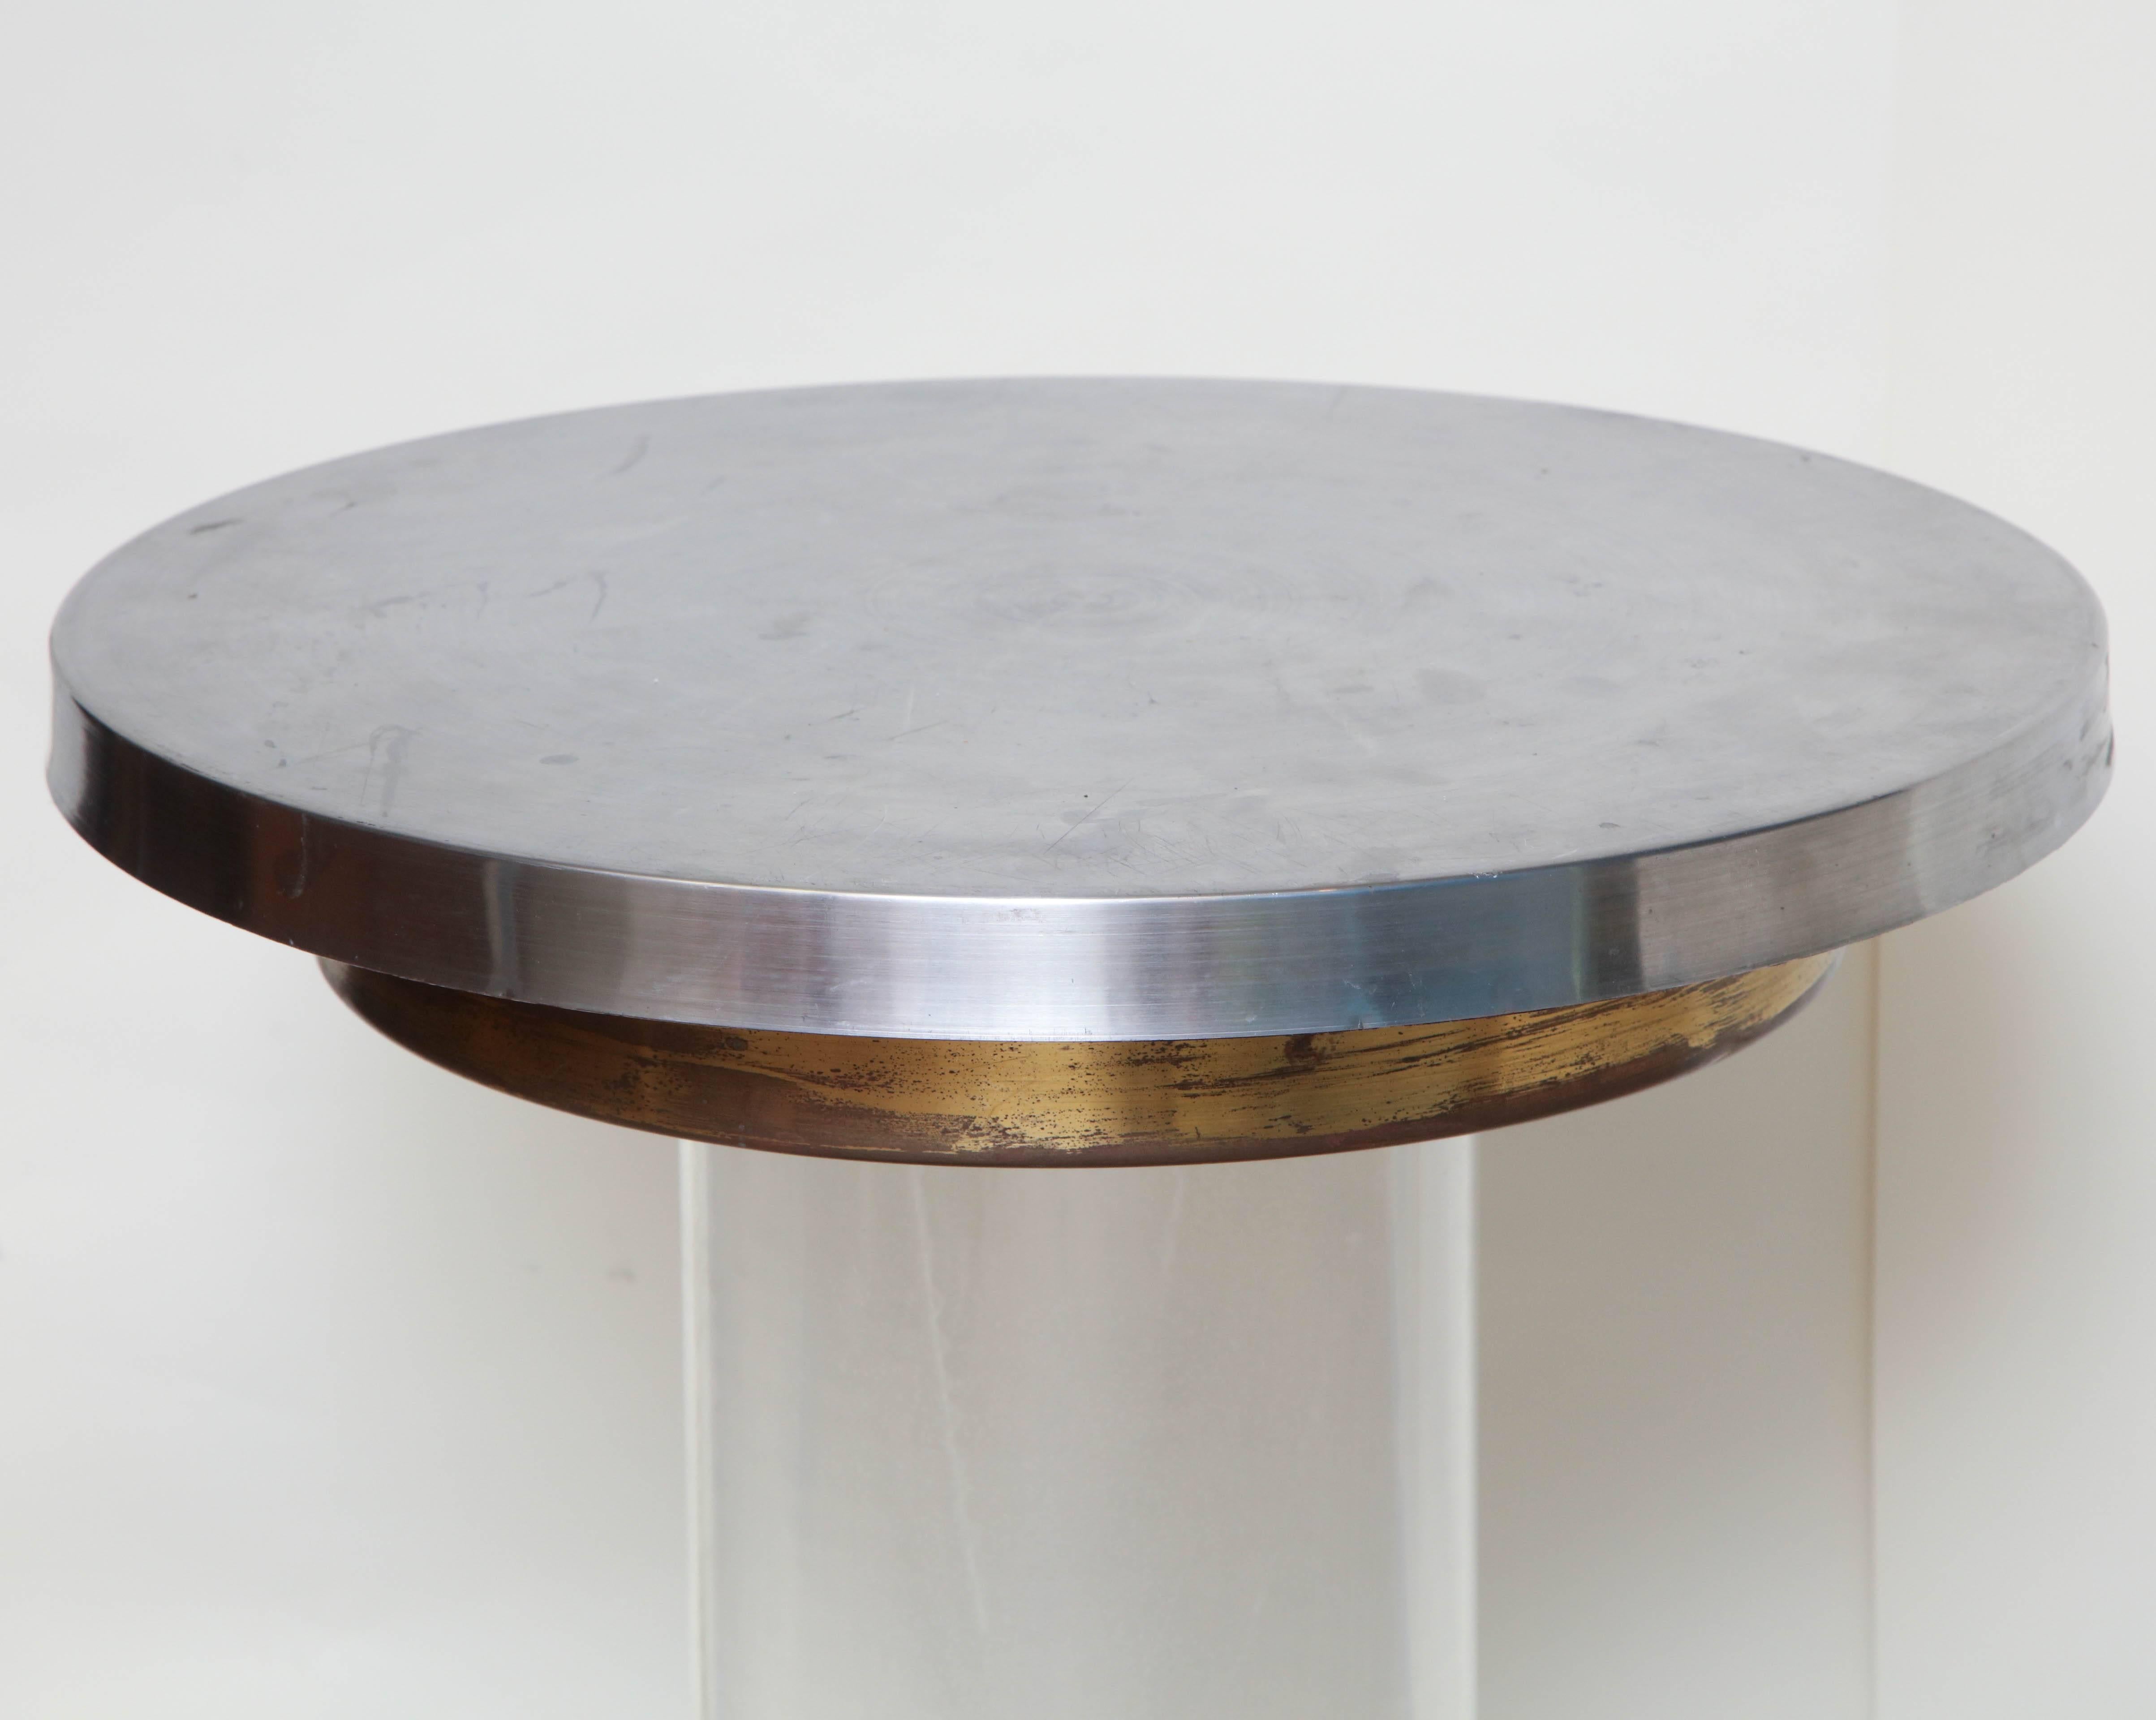 Patinated Table Mid-Century Modern Lucite Aluminum and Brass, 1970s